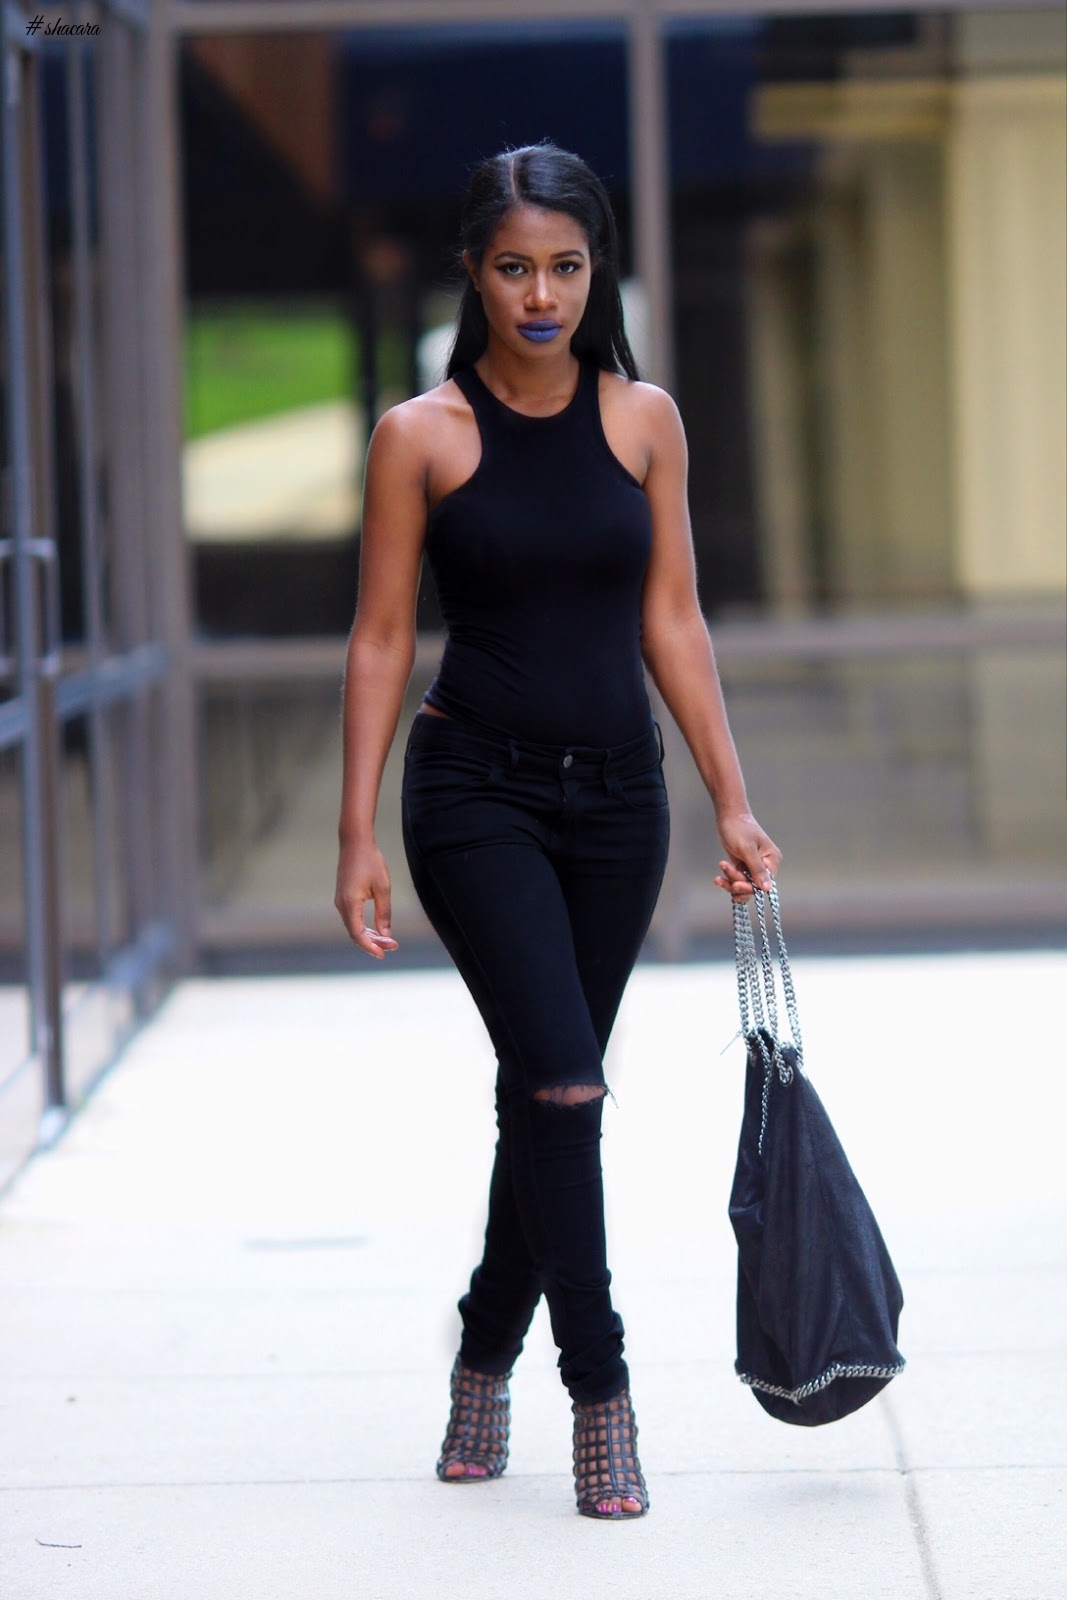 Check Out Black Outfits Ideas You Can Rock Any Day With Elegance